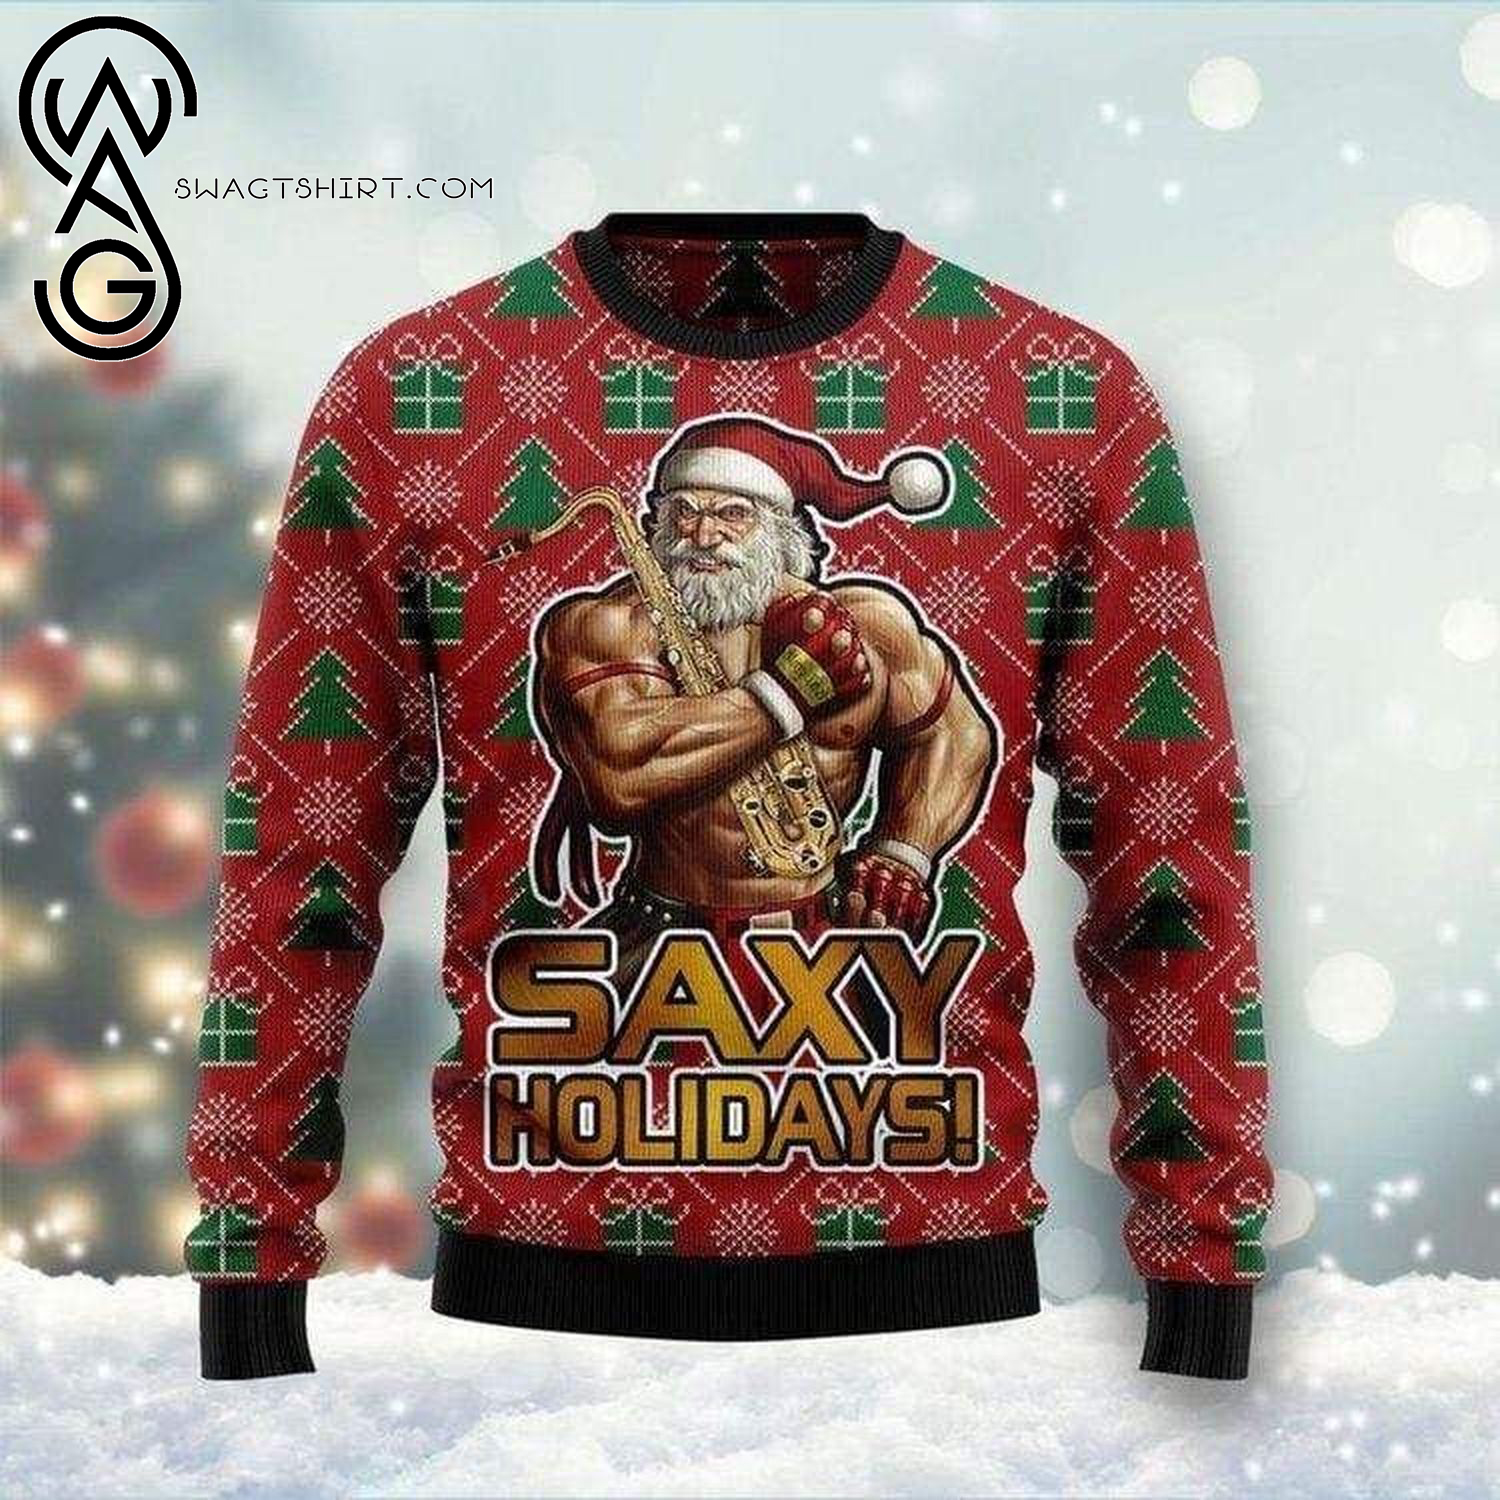 Saxy Holiday Muscle Santa Claus Workout Full Print Ugly Christmas Sweater